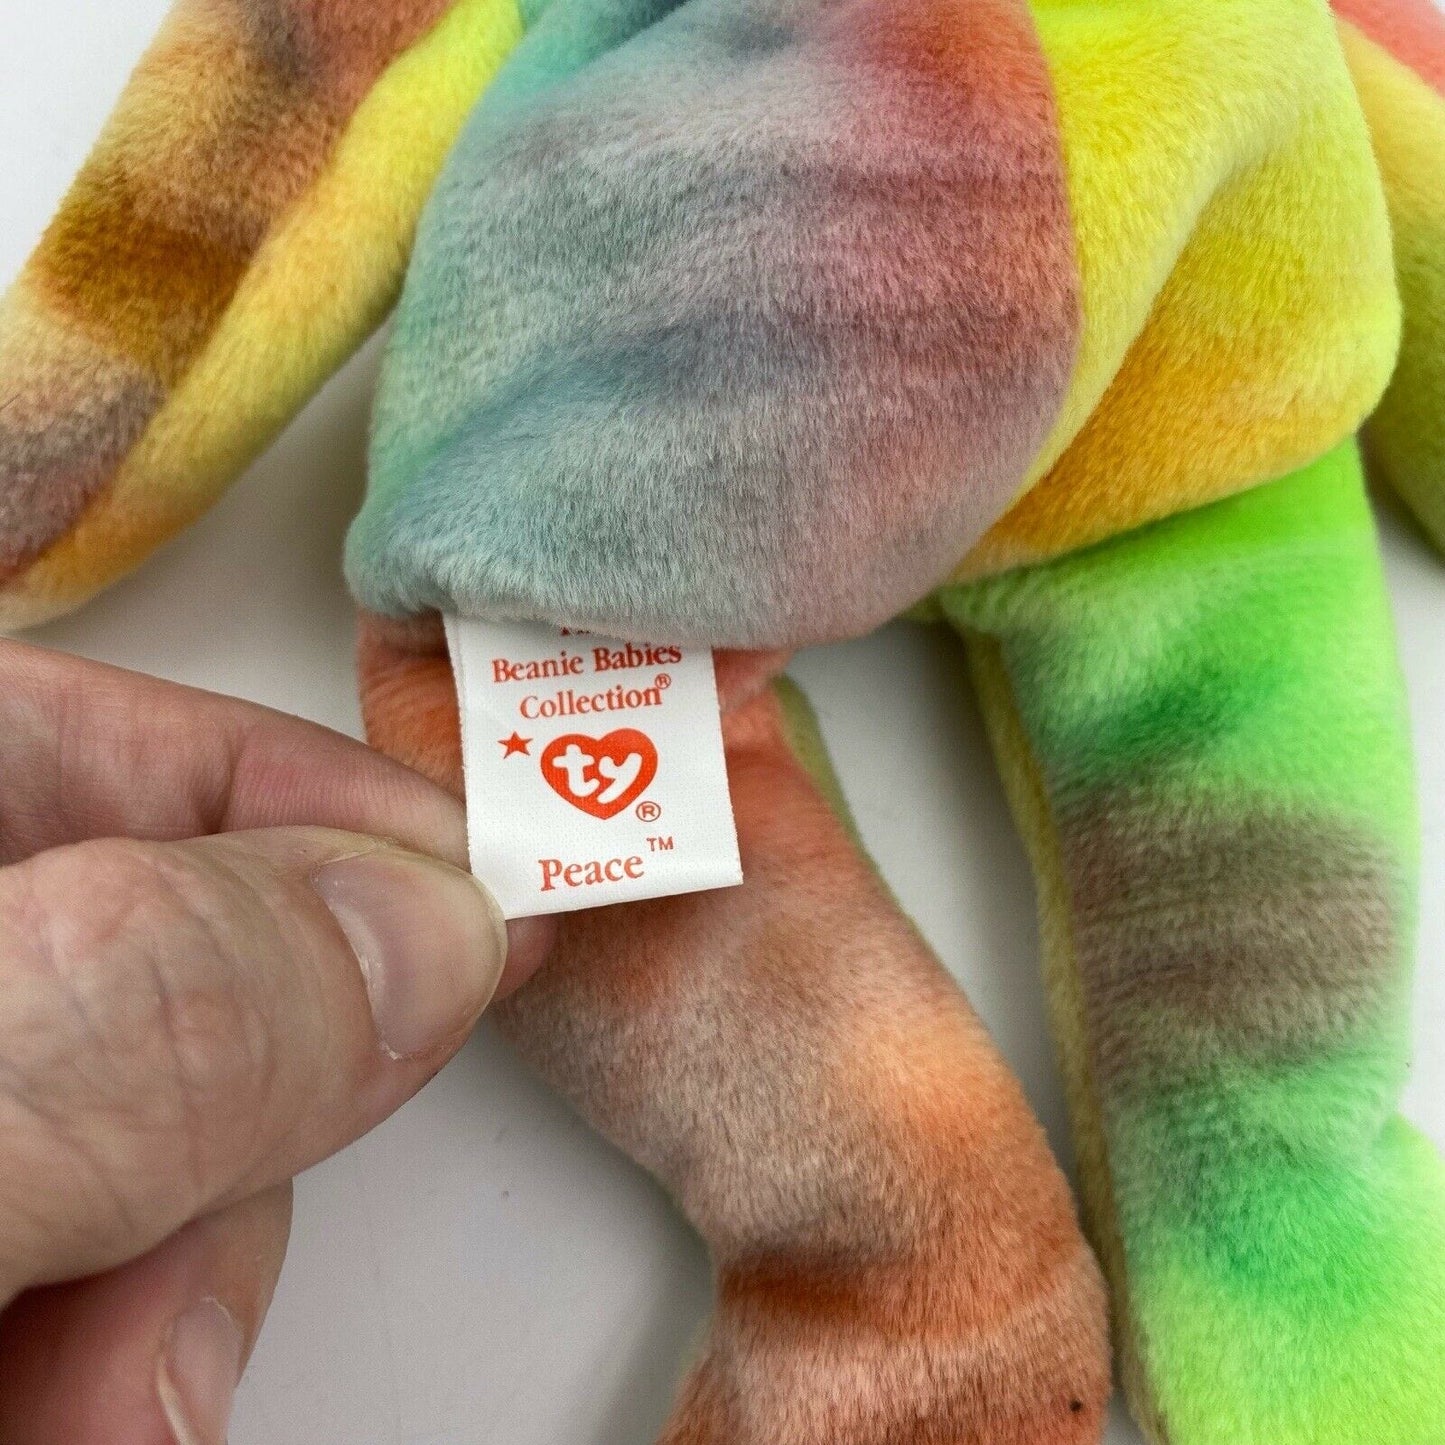 Ty Original Beanie Babies “Peace” Muted Tie Dye 1996 MINT Condition - Tag Errors